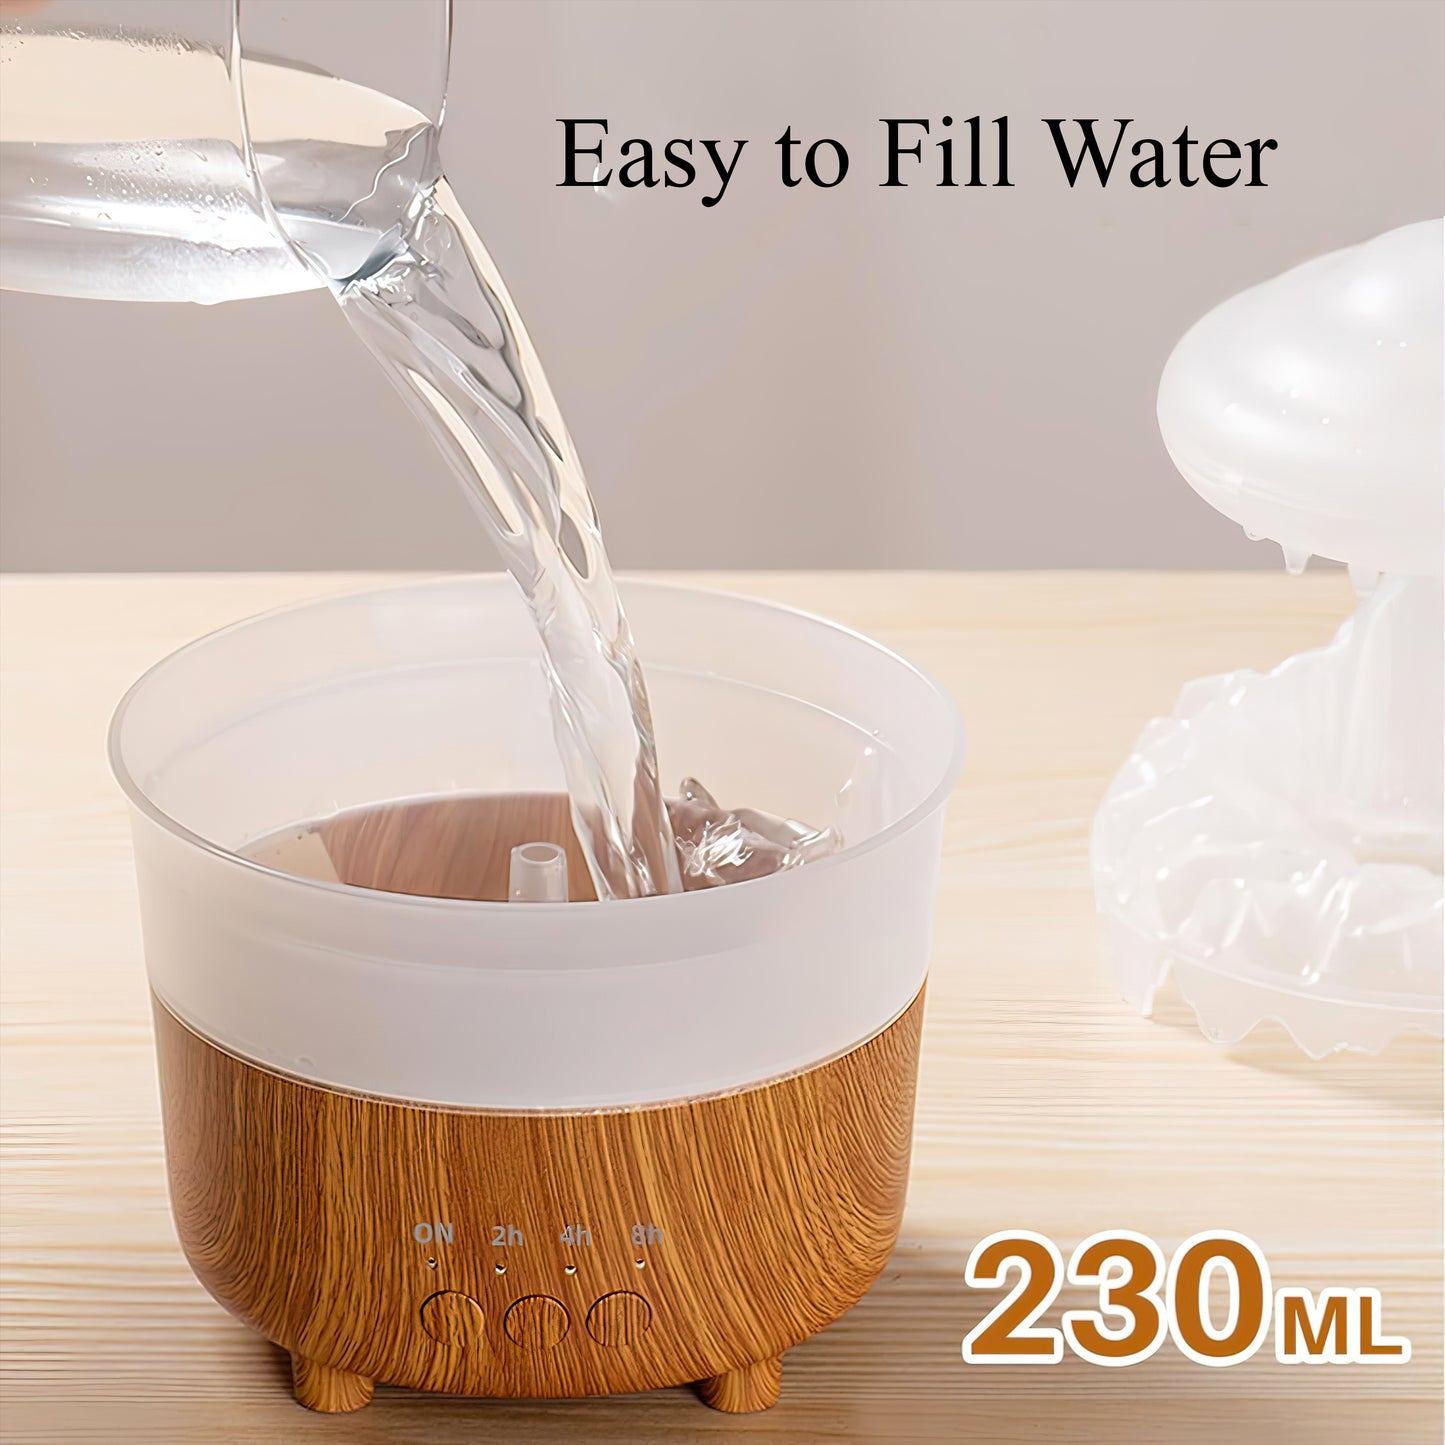 Cloud Rain Humidifier with Raindrop with Remote